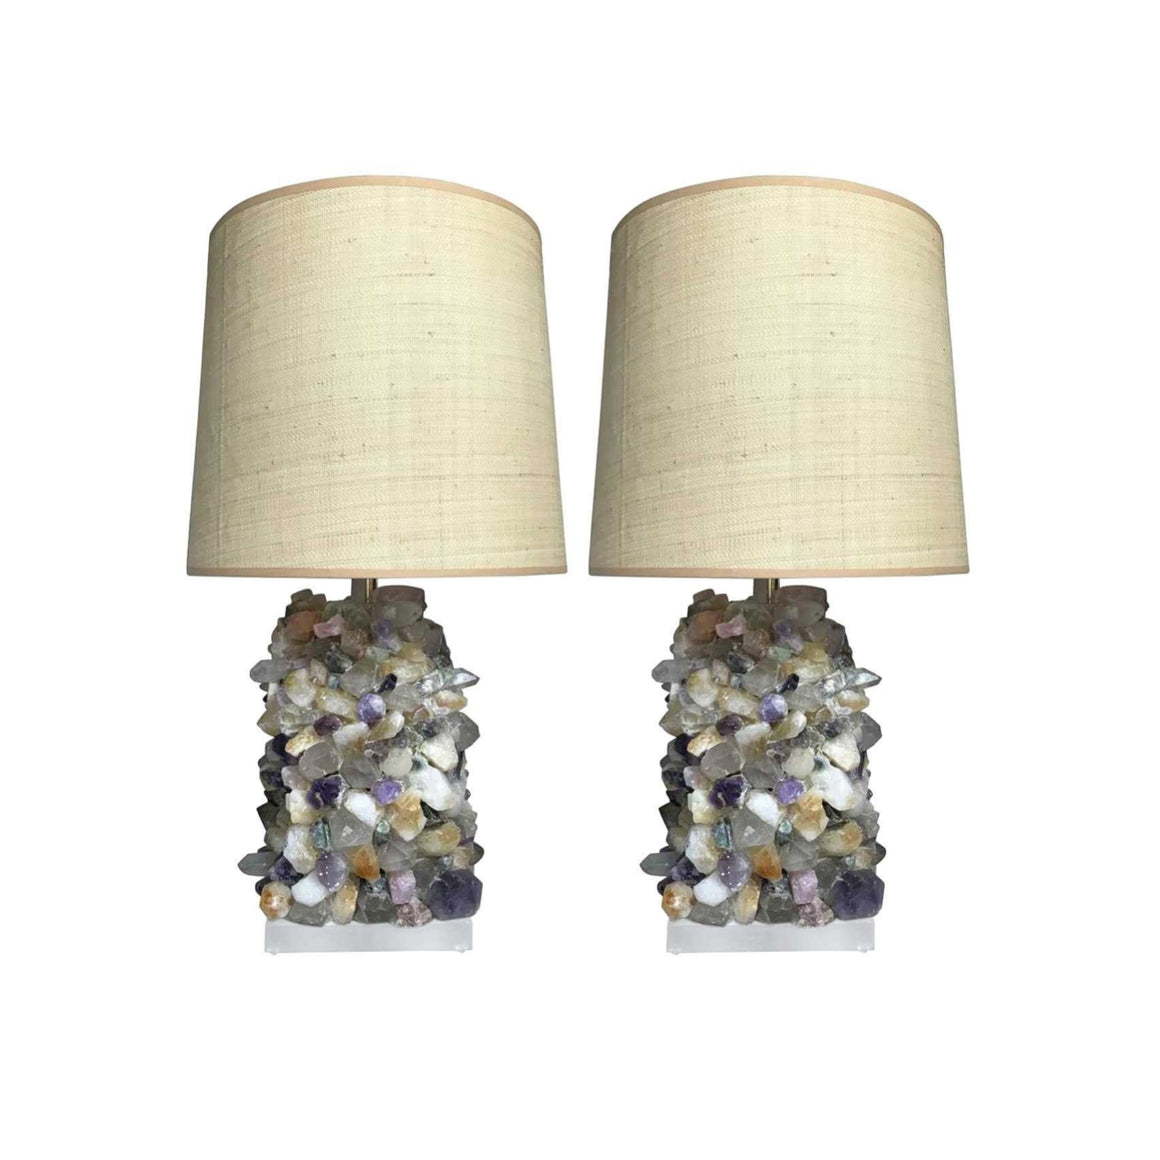 Pair of Vintage Amethyst And Rock Crystal Table Lamps